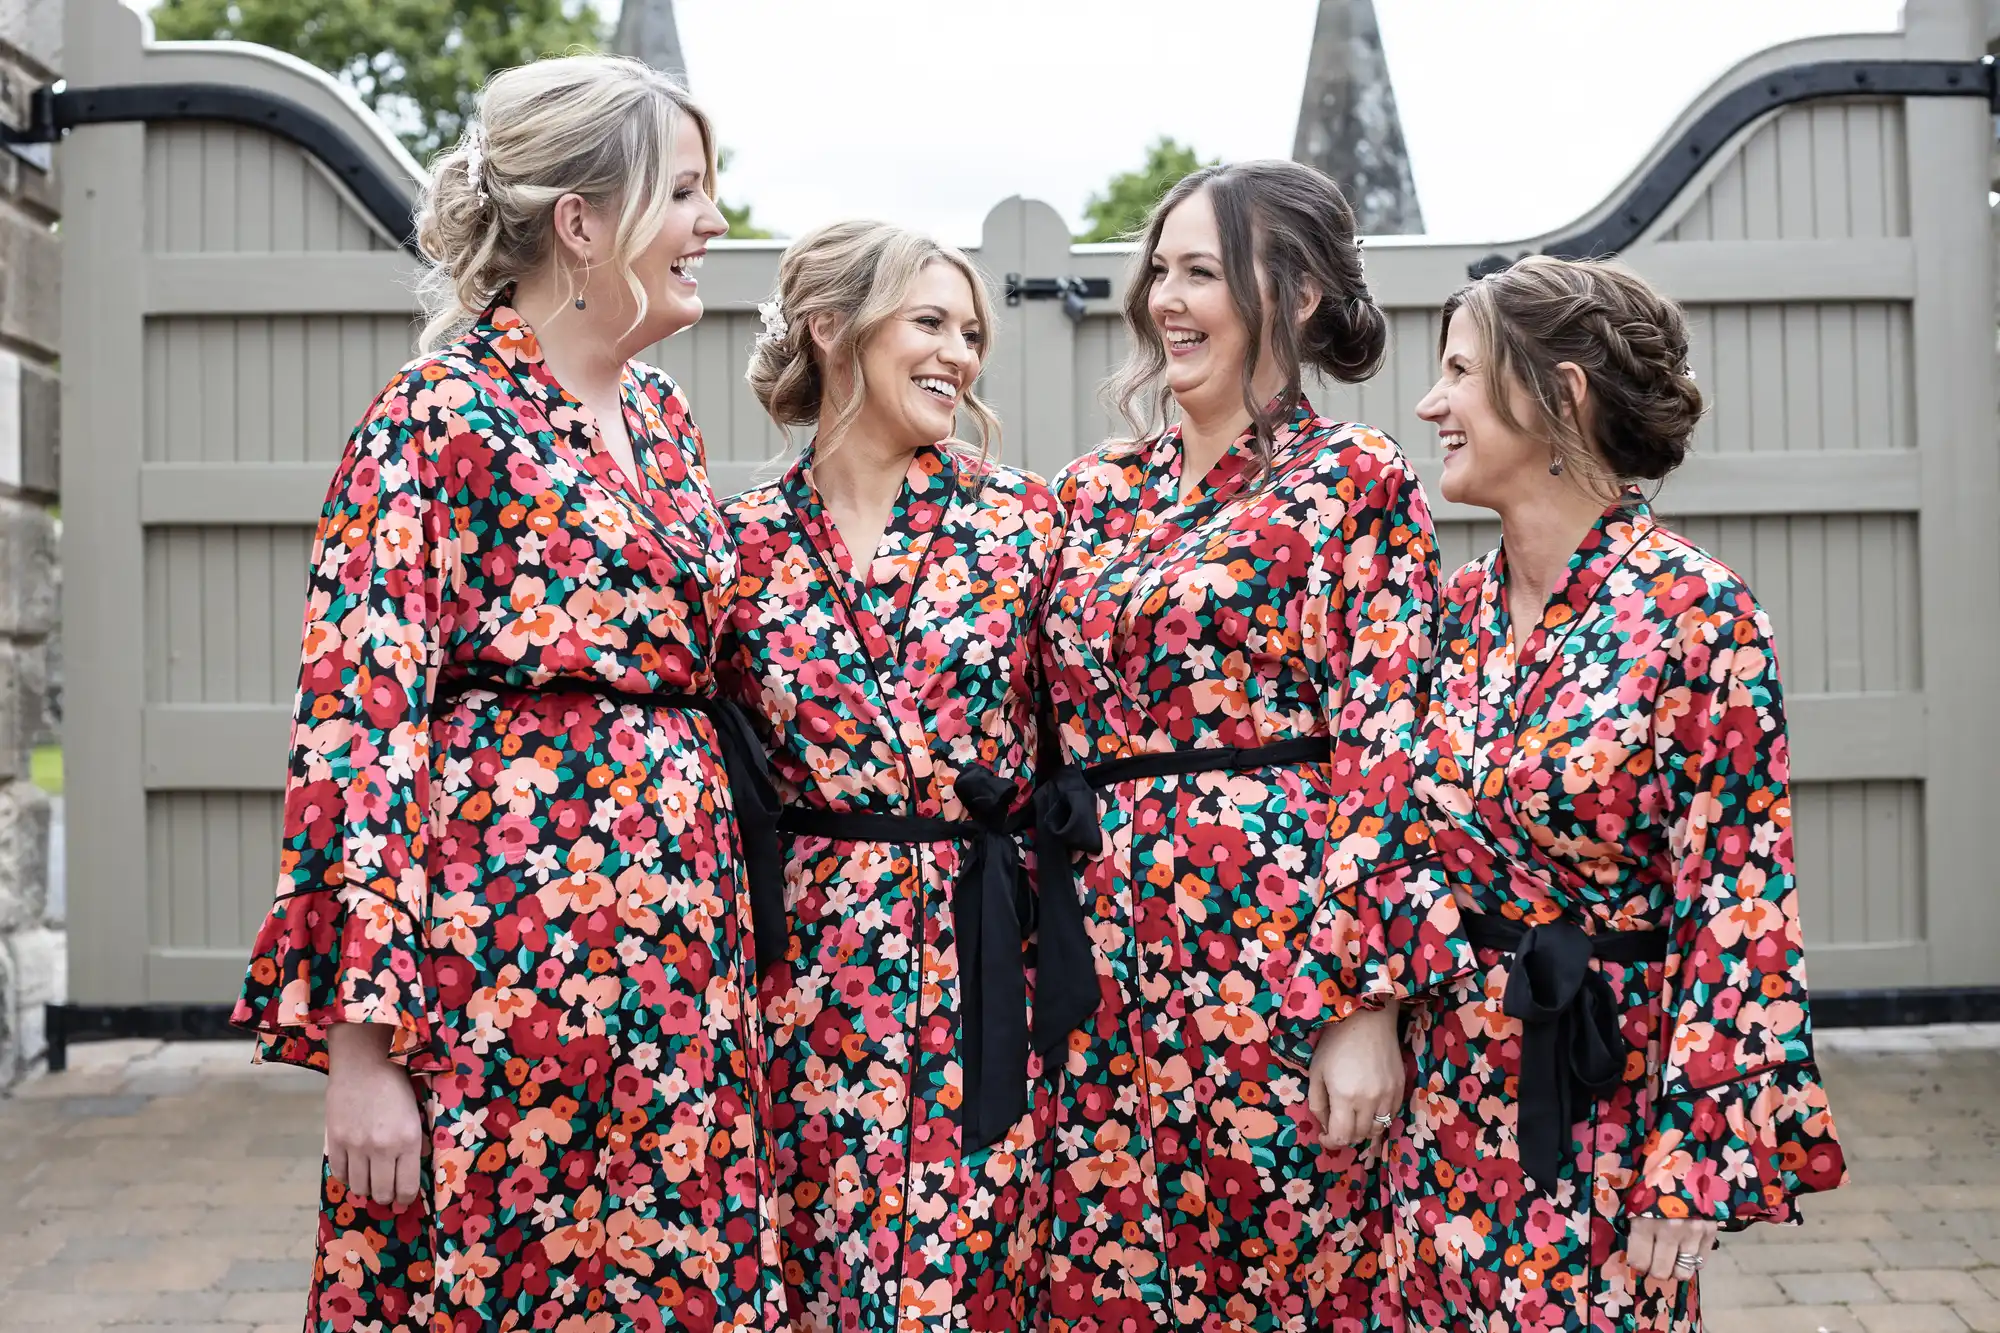 Four women in matching floral robes laugh together in front of a fence with spear-top designs.